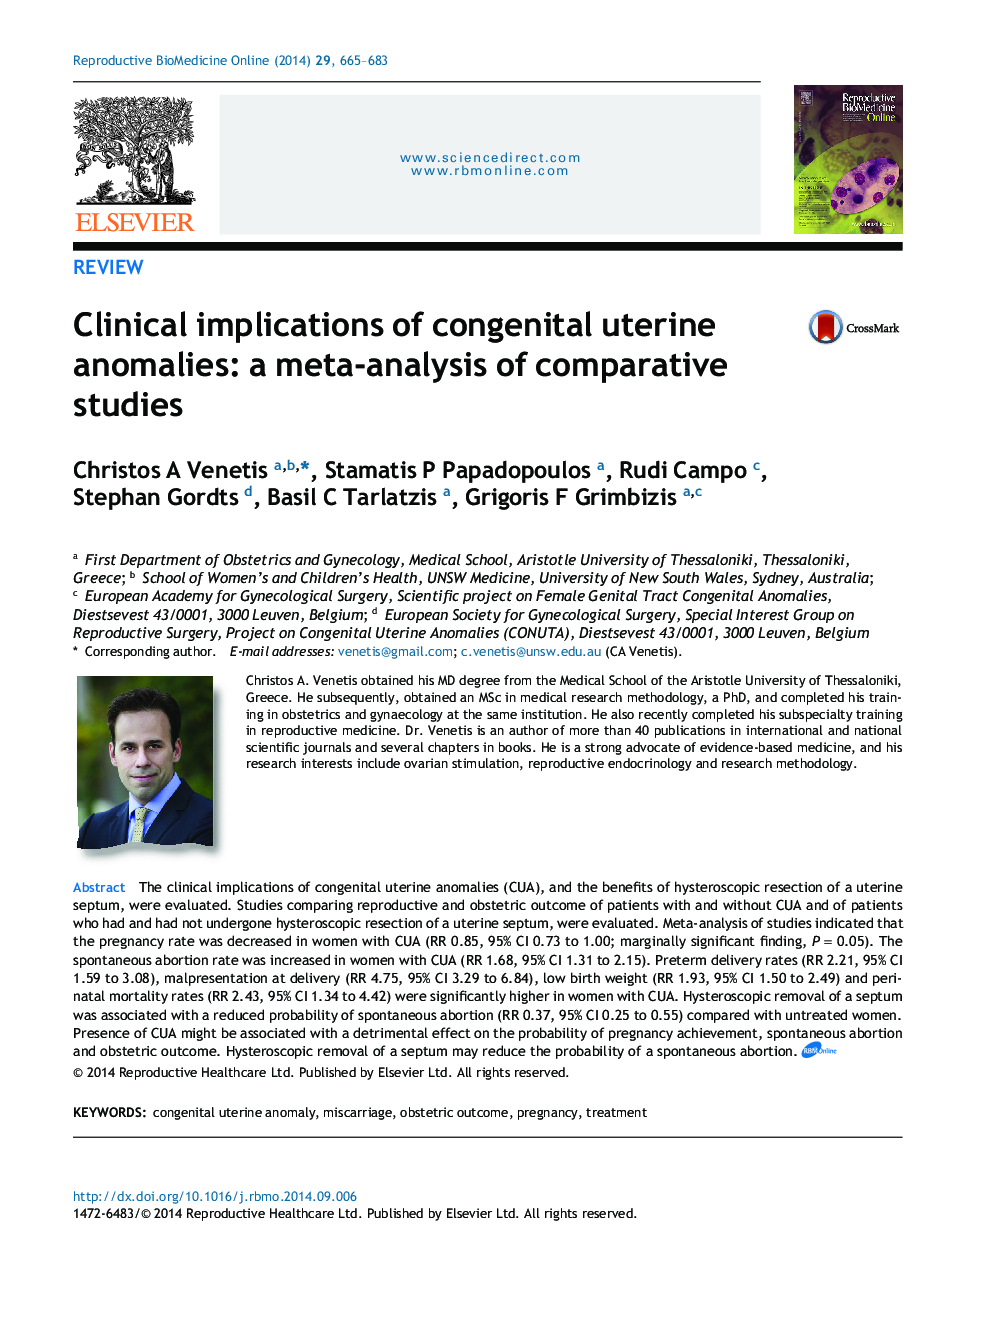 Clinical implications of congenital uterine anomalies: a meta-analysis of comparative studies